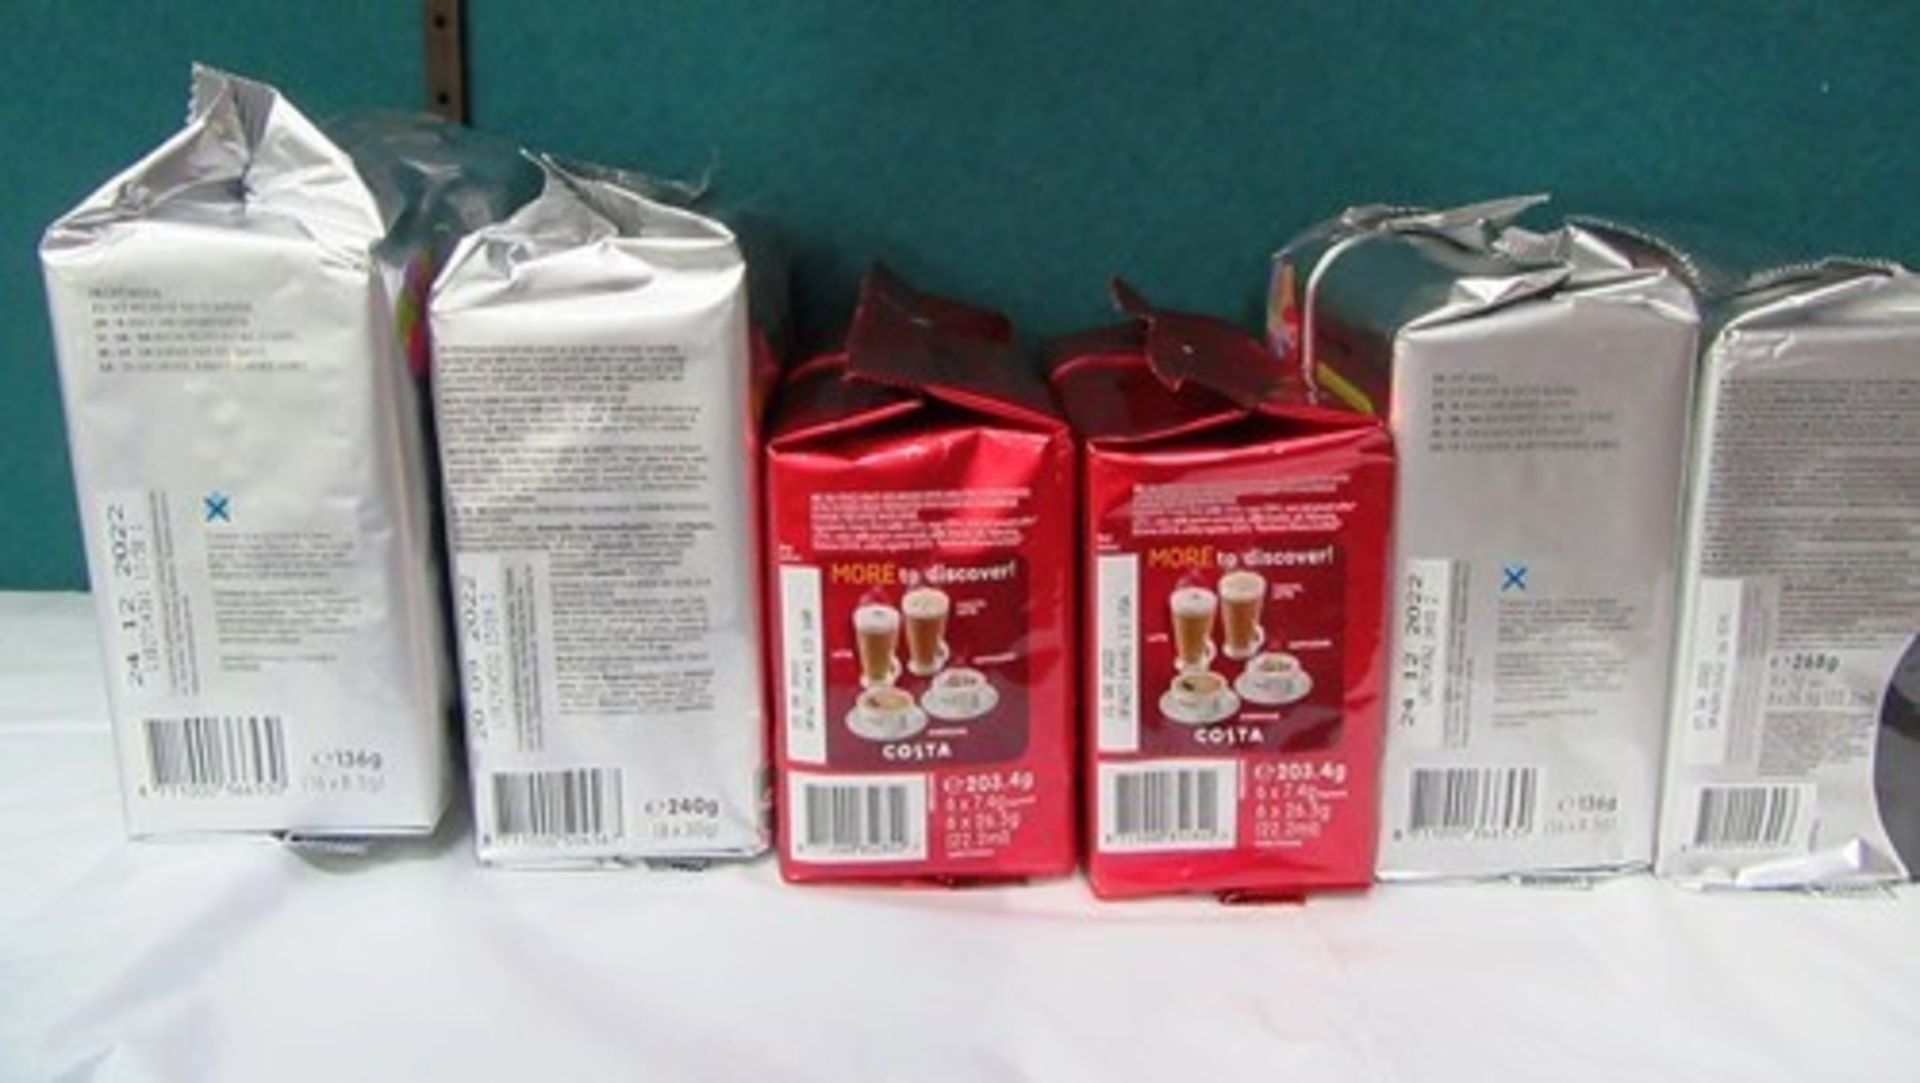 6 x boxes each containing 5 x 223.2g Tassimo products, to include L'or latte Macchiato, Creamer, - Image 8 of 8